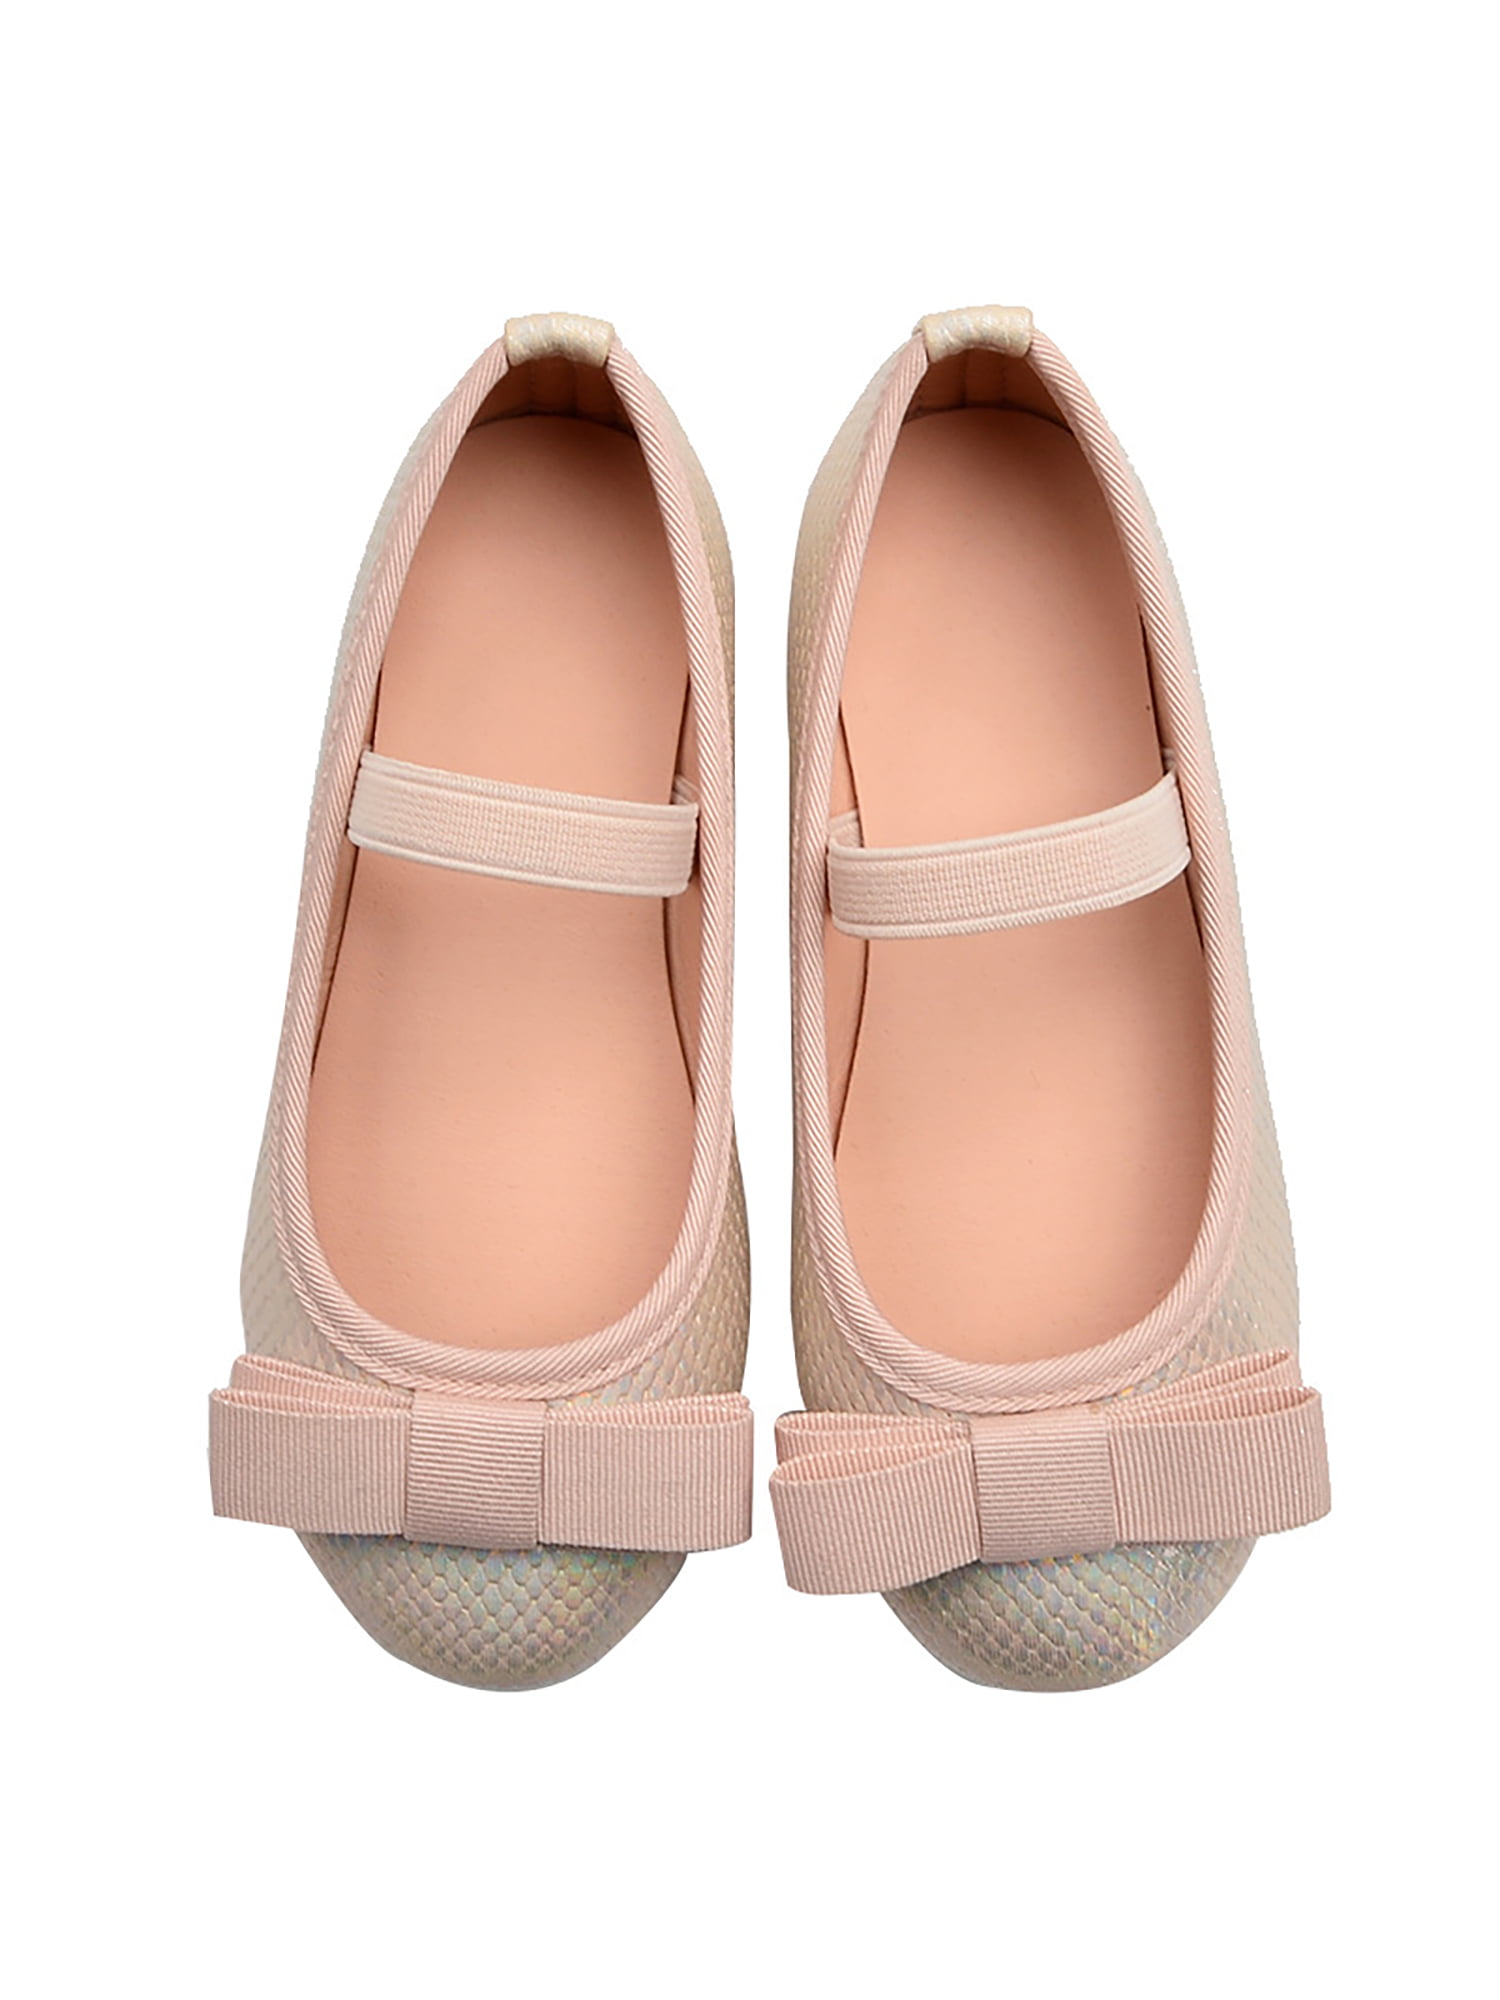 Details about  / Kids Girls Fashion Sweet Diamante Bowknot Boat Shoes Flower Girls Dress Shoes